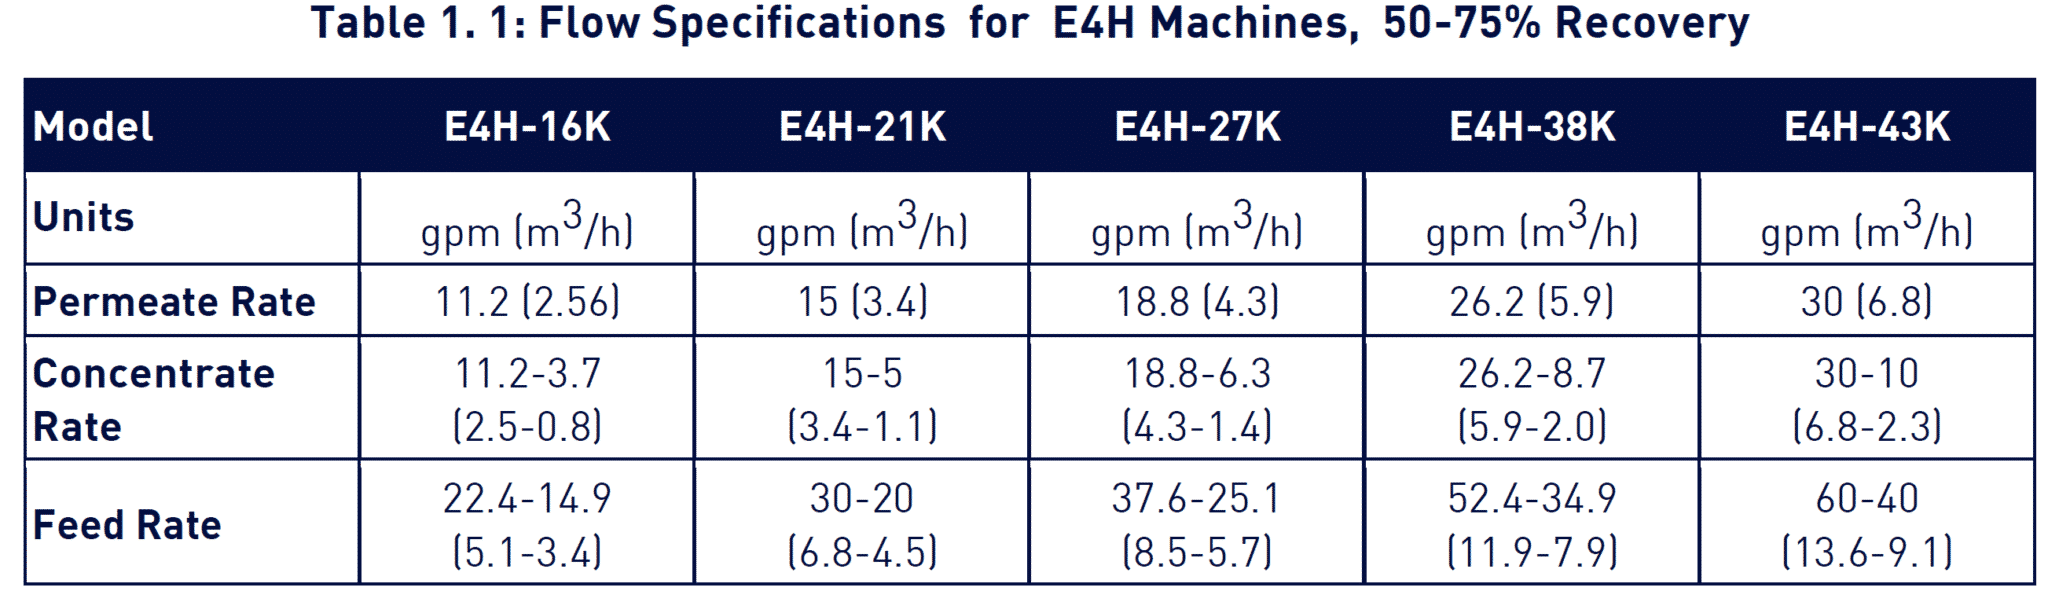 tabler 1.1 flow specifications for e4h machines 50-75 percent recovery